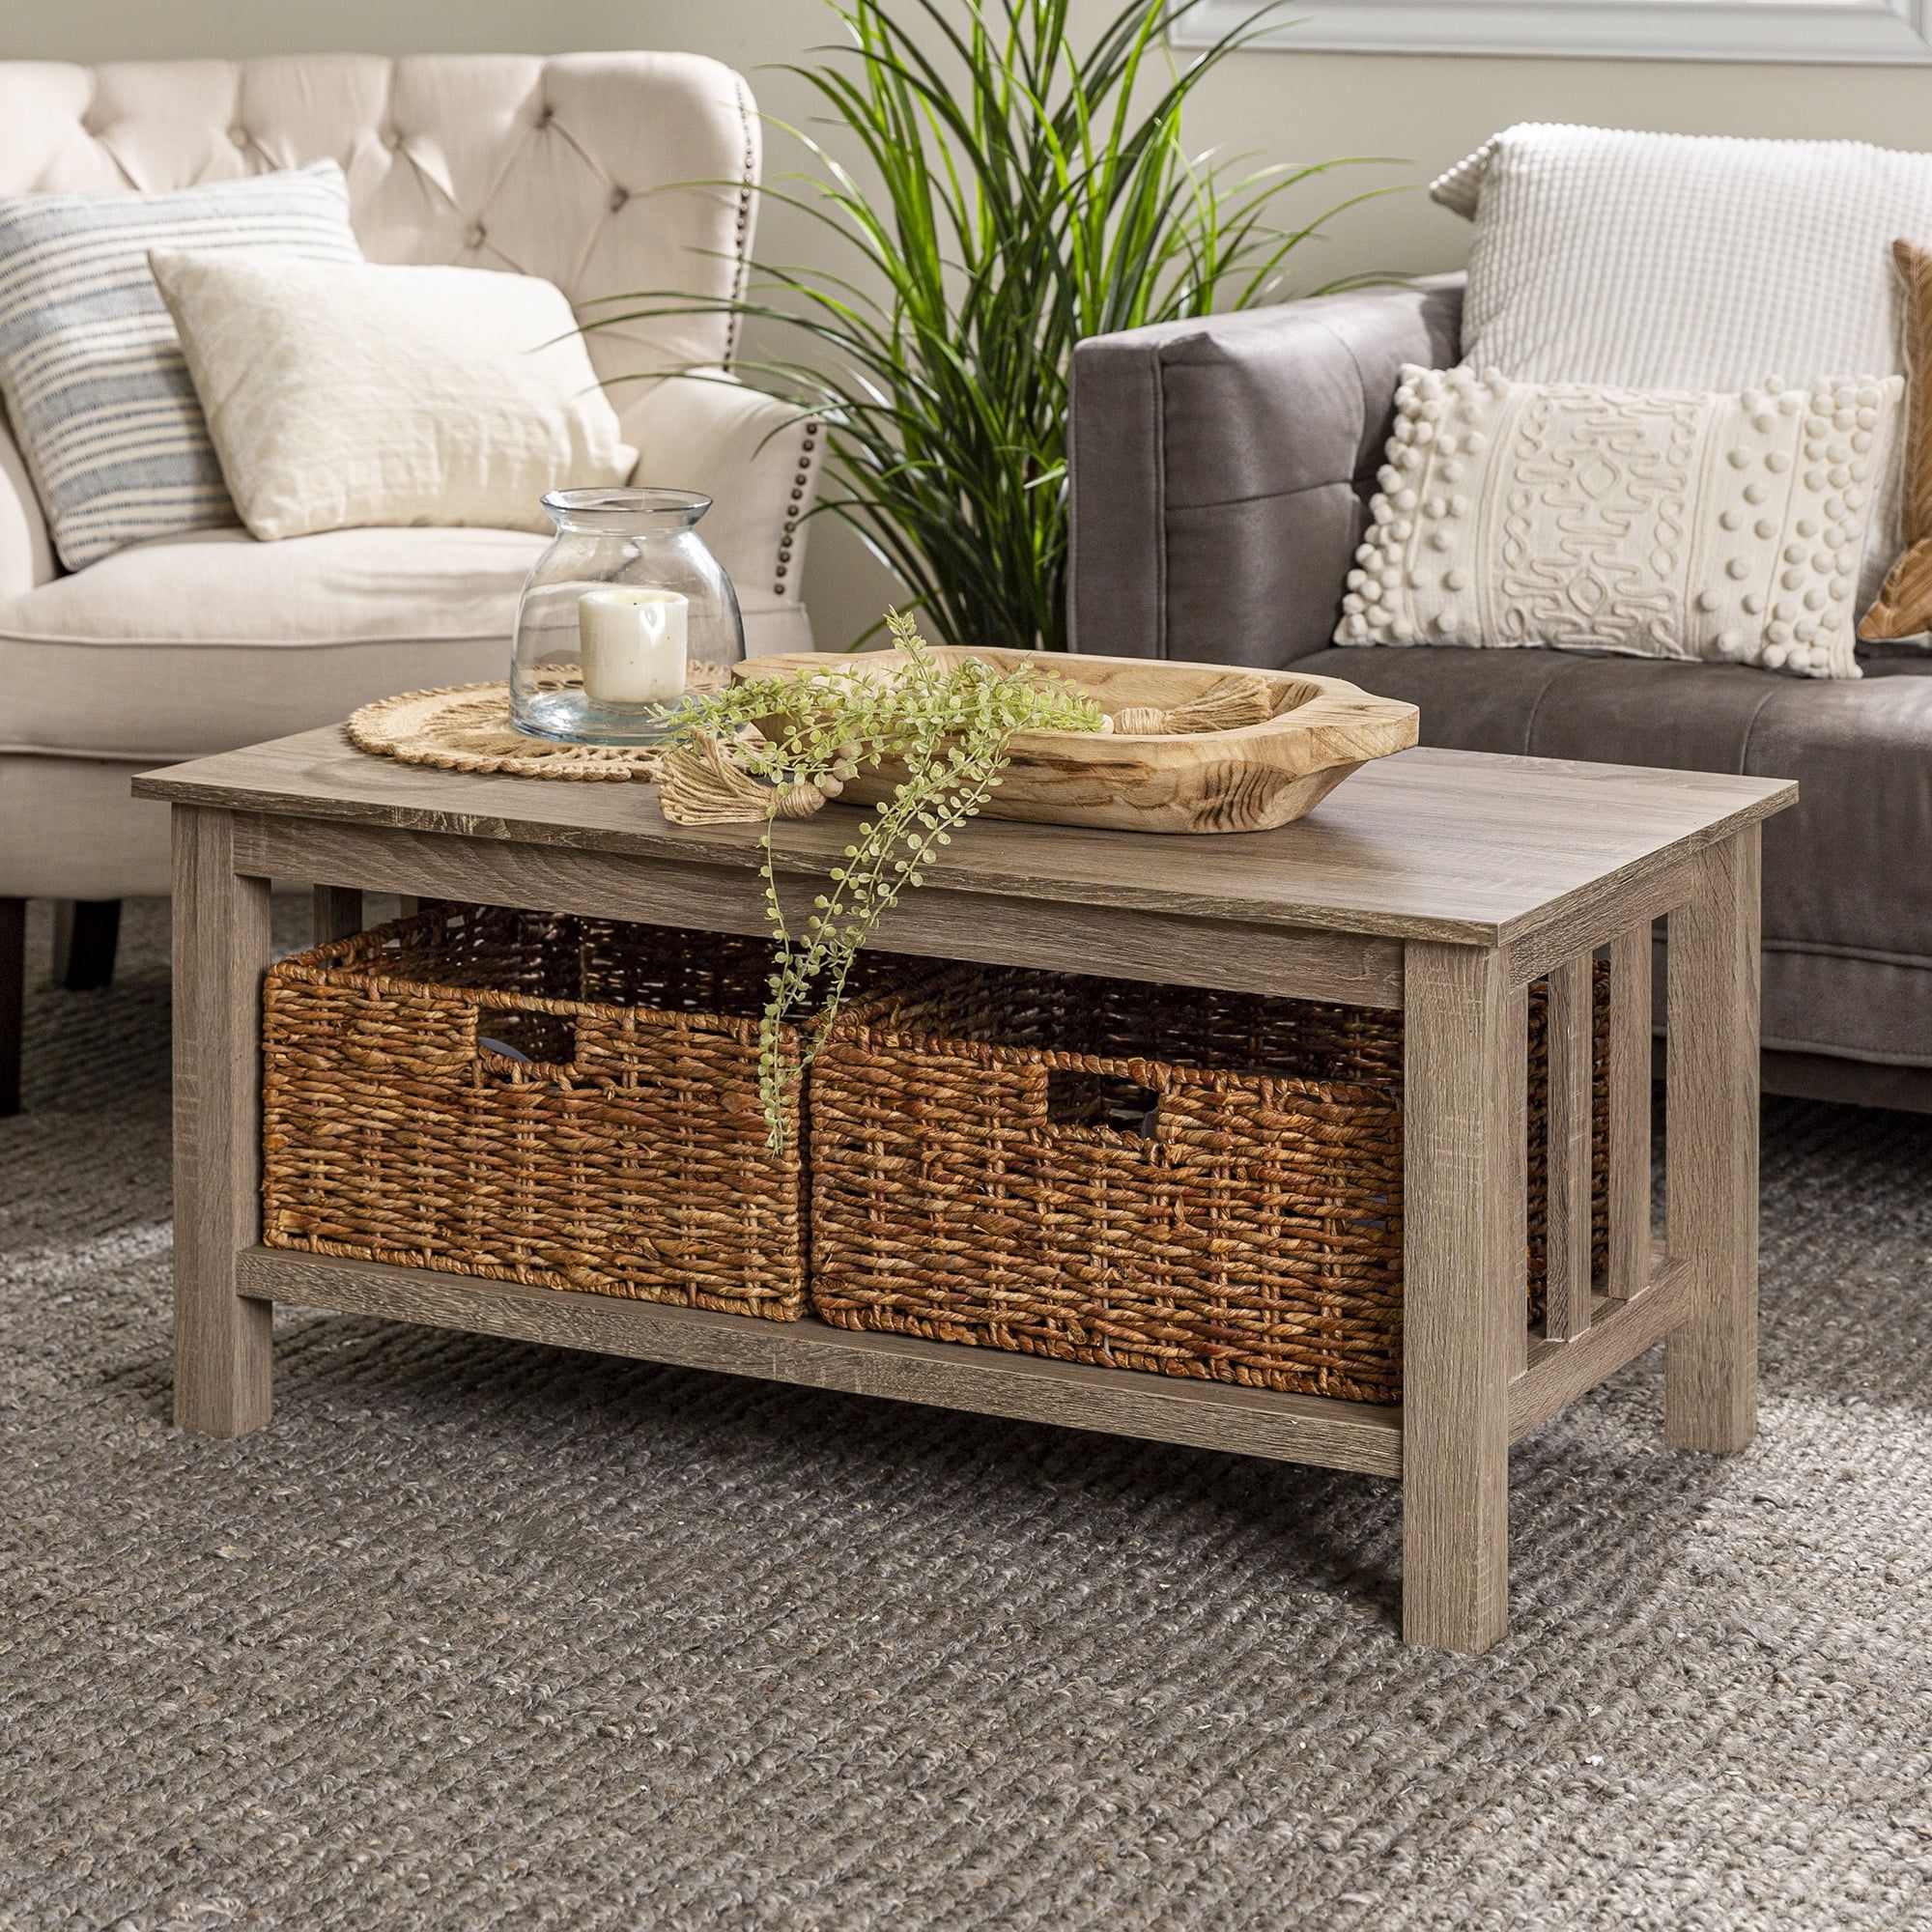 Woven Paths Traditional Storage Coffee Table W/ Bins $110 At Walmart With Woven Paths Coffee Tables (Gallery 13 of 20)